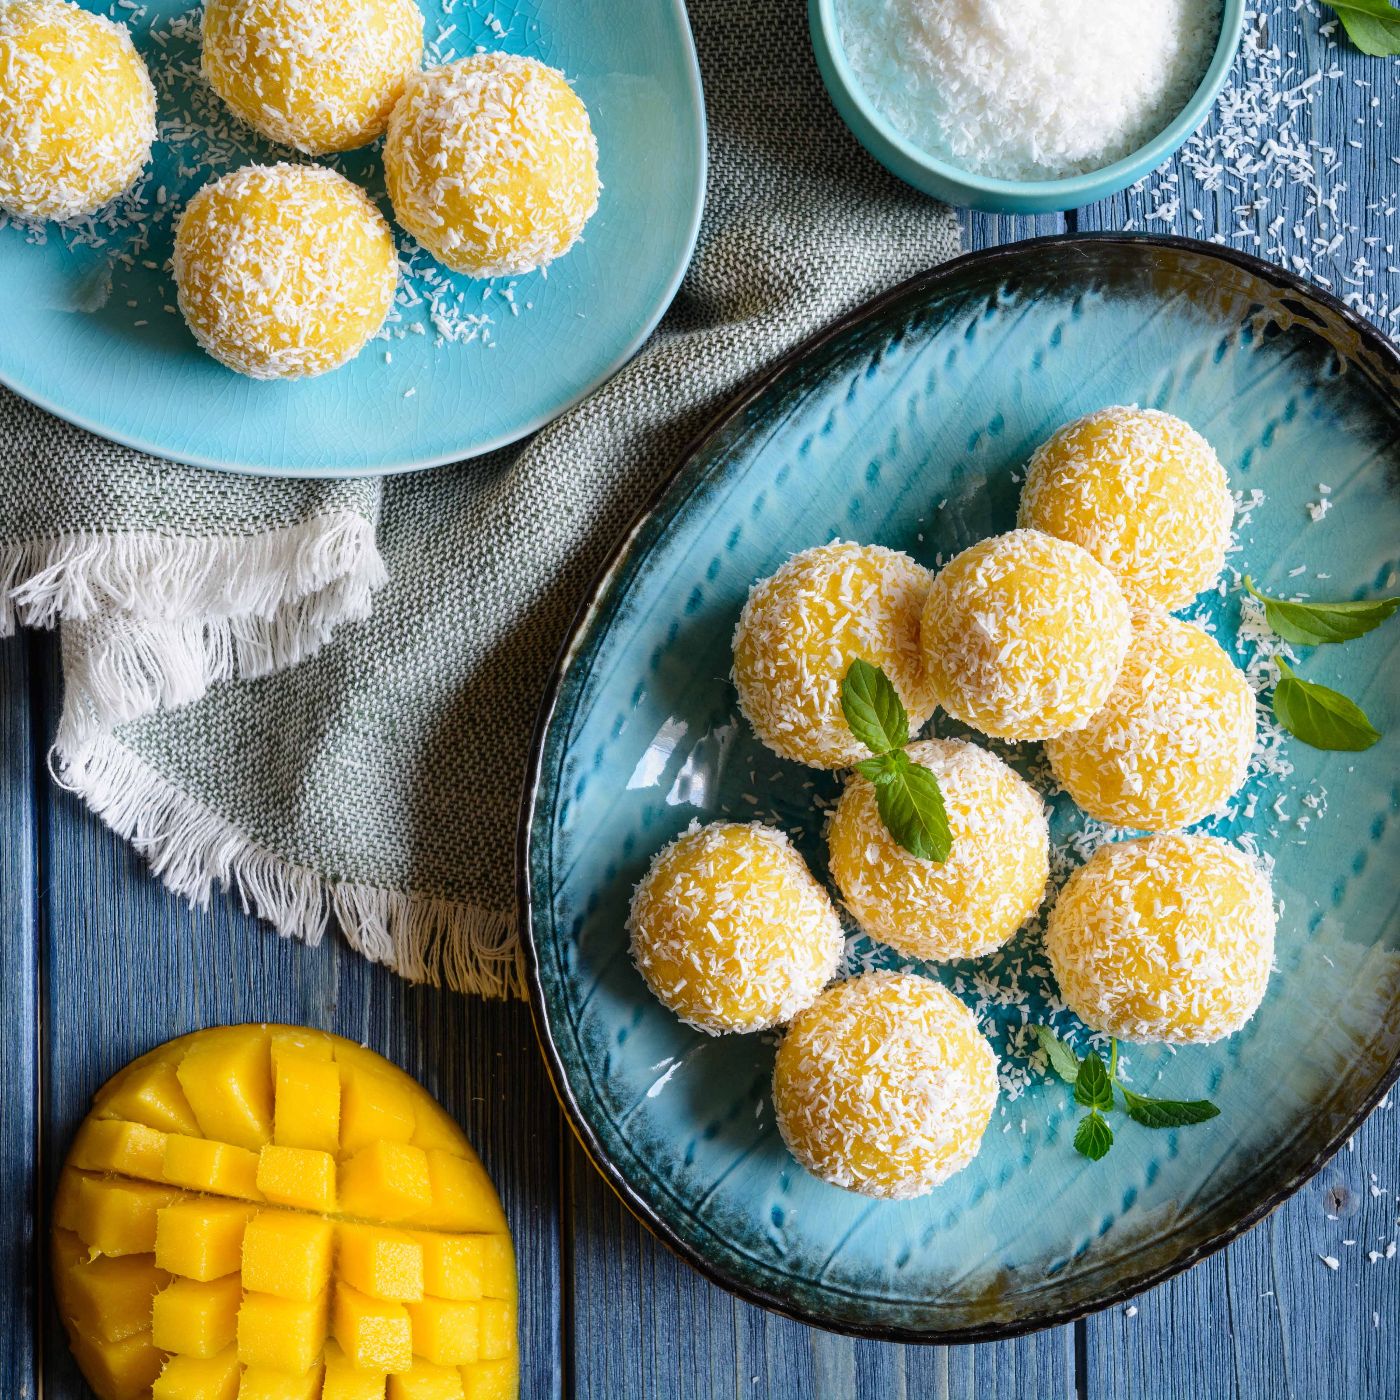 Mango-Coconut-Ladoo--sweet-balls-made-of-mango-puree-desiccated-coconut-and-condensed-milk-1253126248_6000x4000_square.jpg